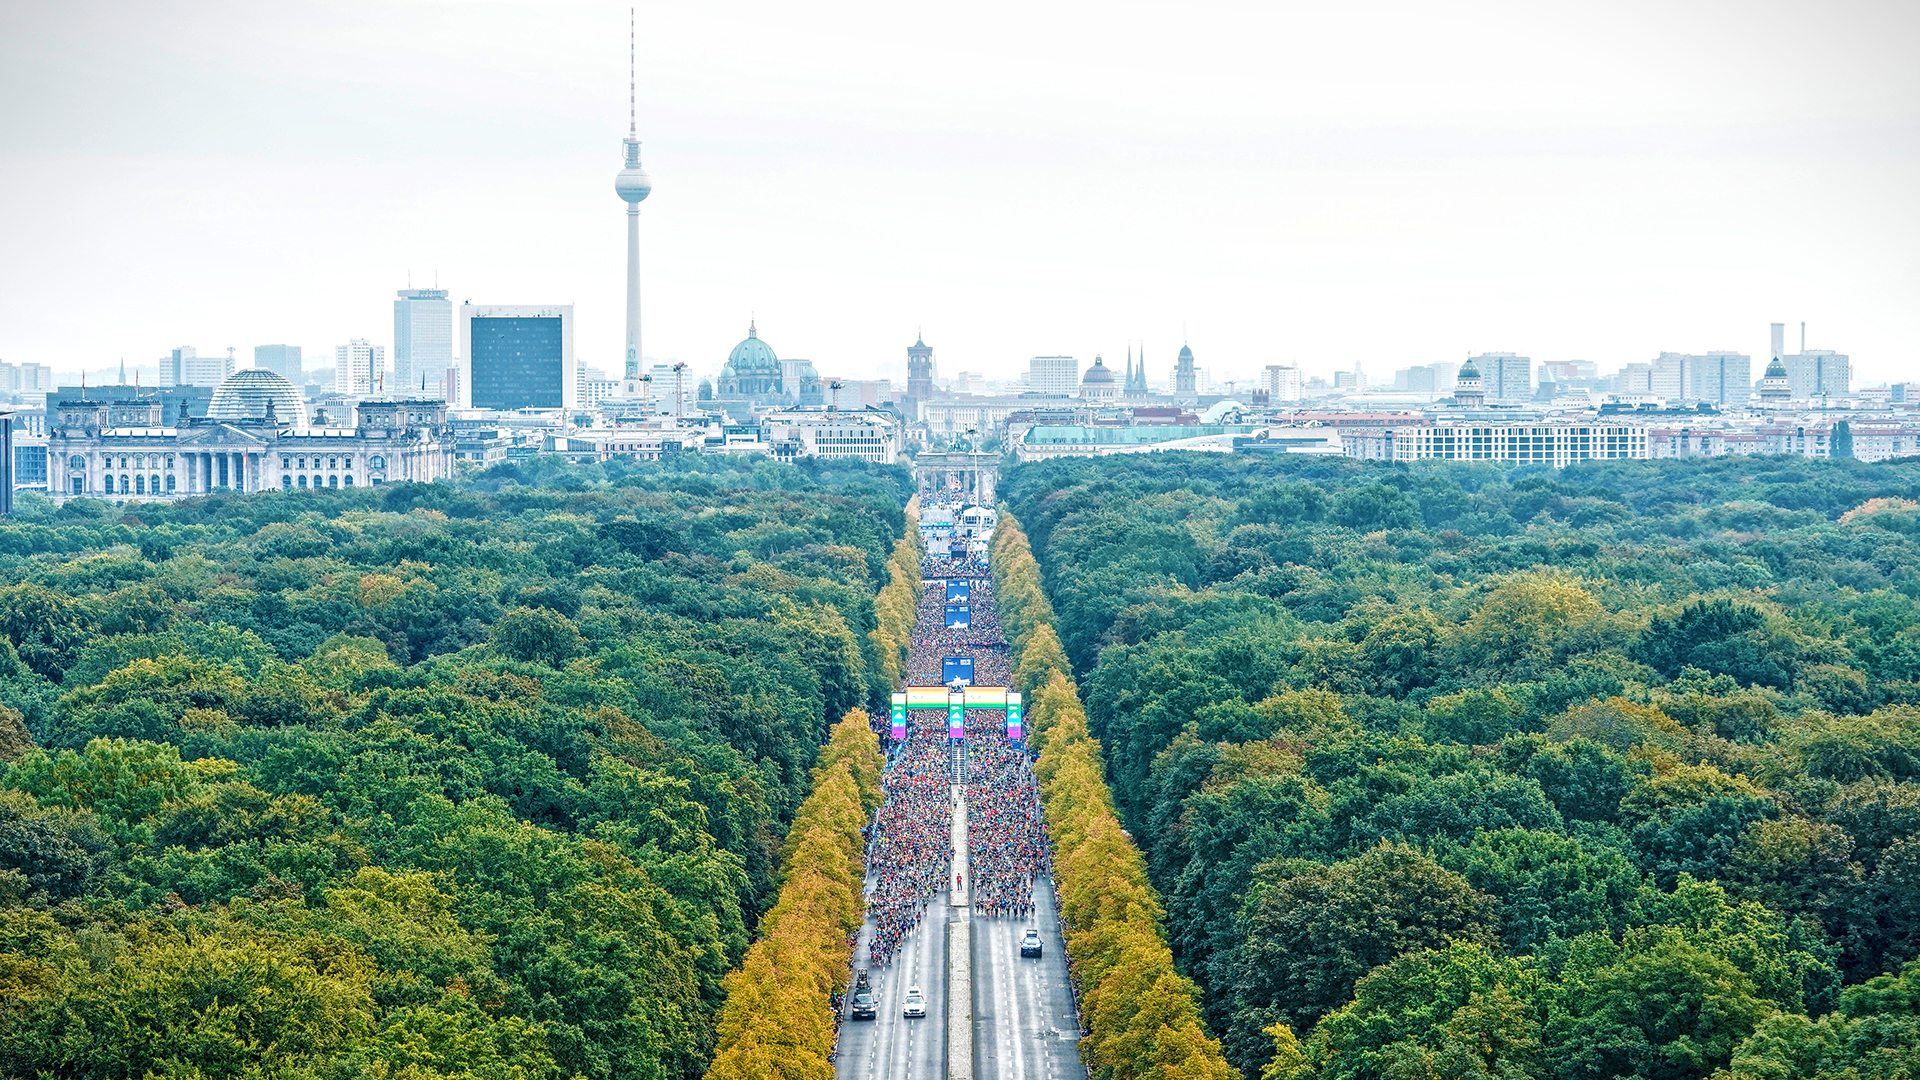 tart of the BMW BERLIN-MARATHON with the Berlin skyline. Bird's eye view of the start of the BMW BERLIN-MARATHON in the Tiergarten with the Berlin skyline in the background. ©sportographers / SCC EVENTS